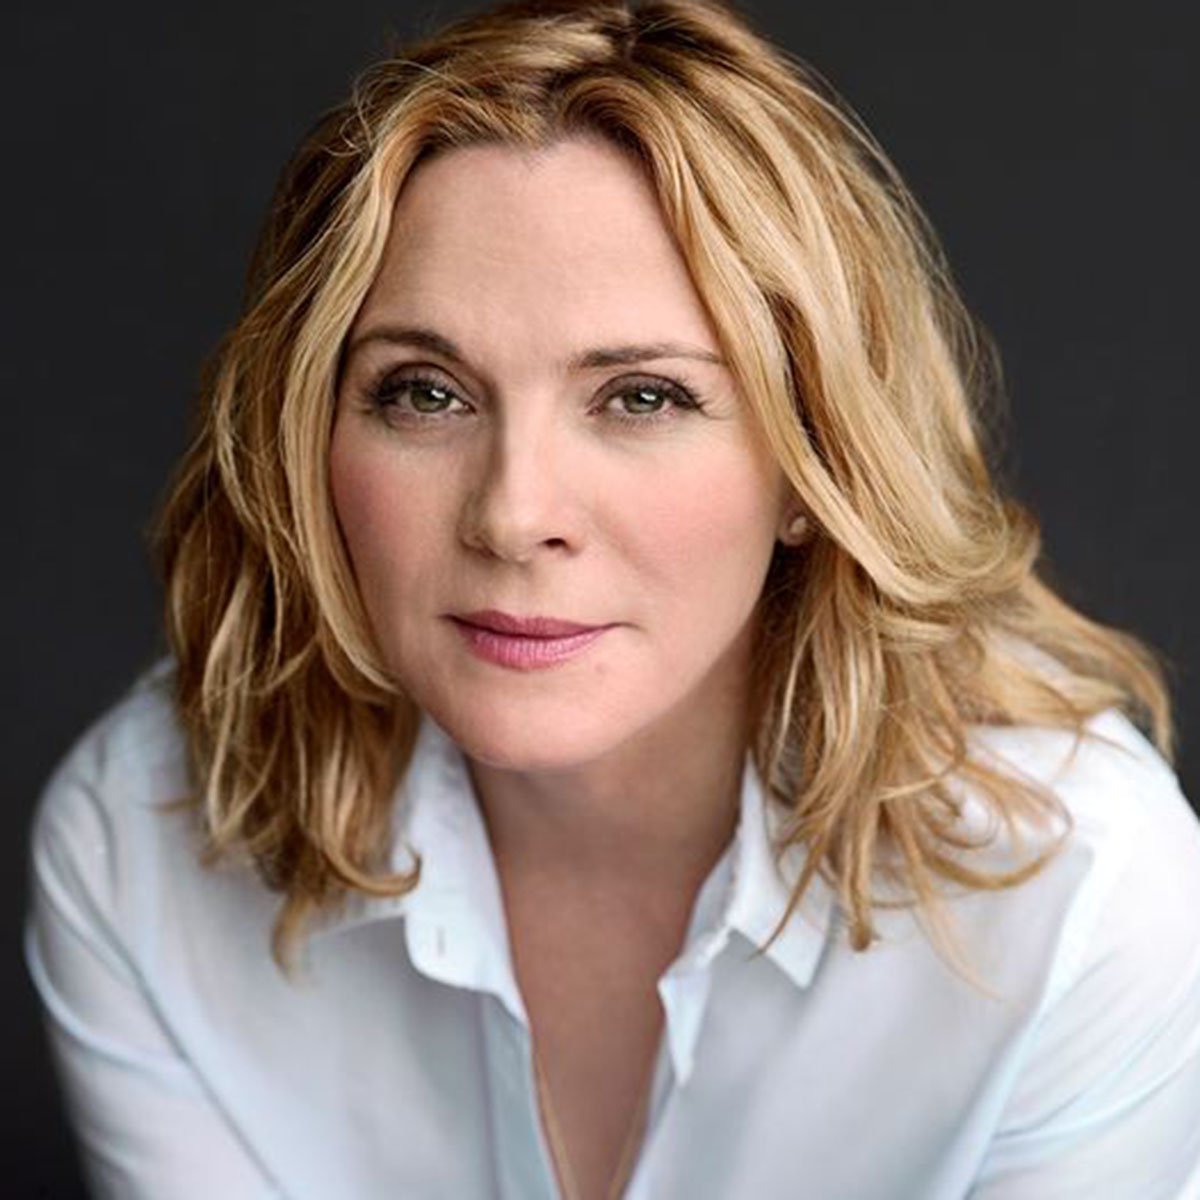 We're proud to recognize award-winning actor, producer and author@KimCattrall with an honorary degree at #UBCgrad this morning. ow.ly/ywrY30mMQgx